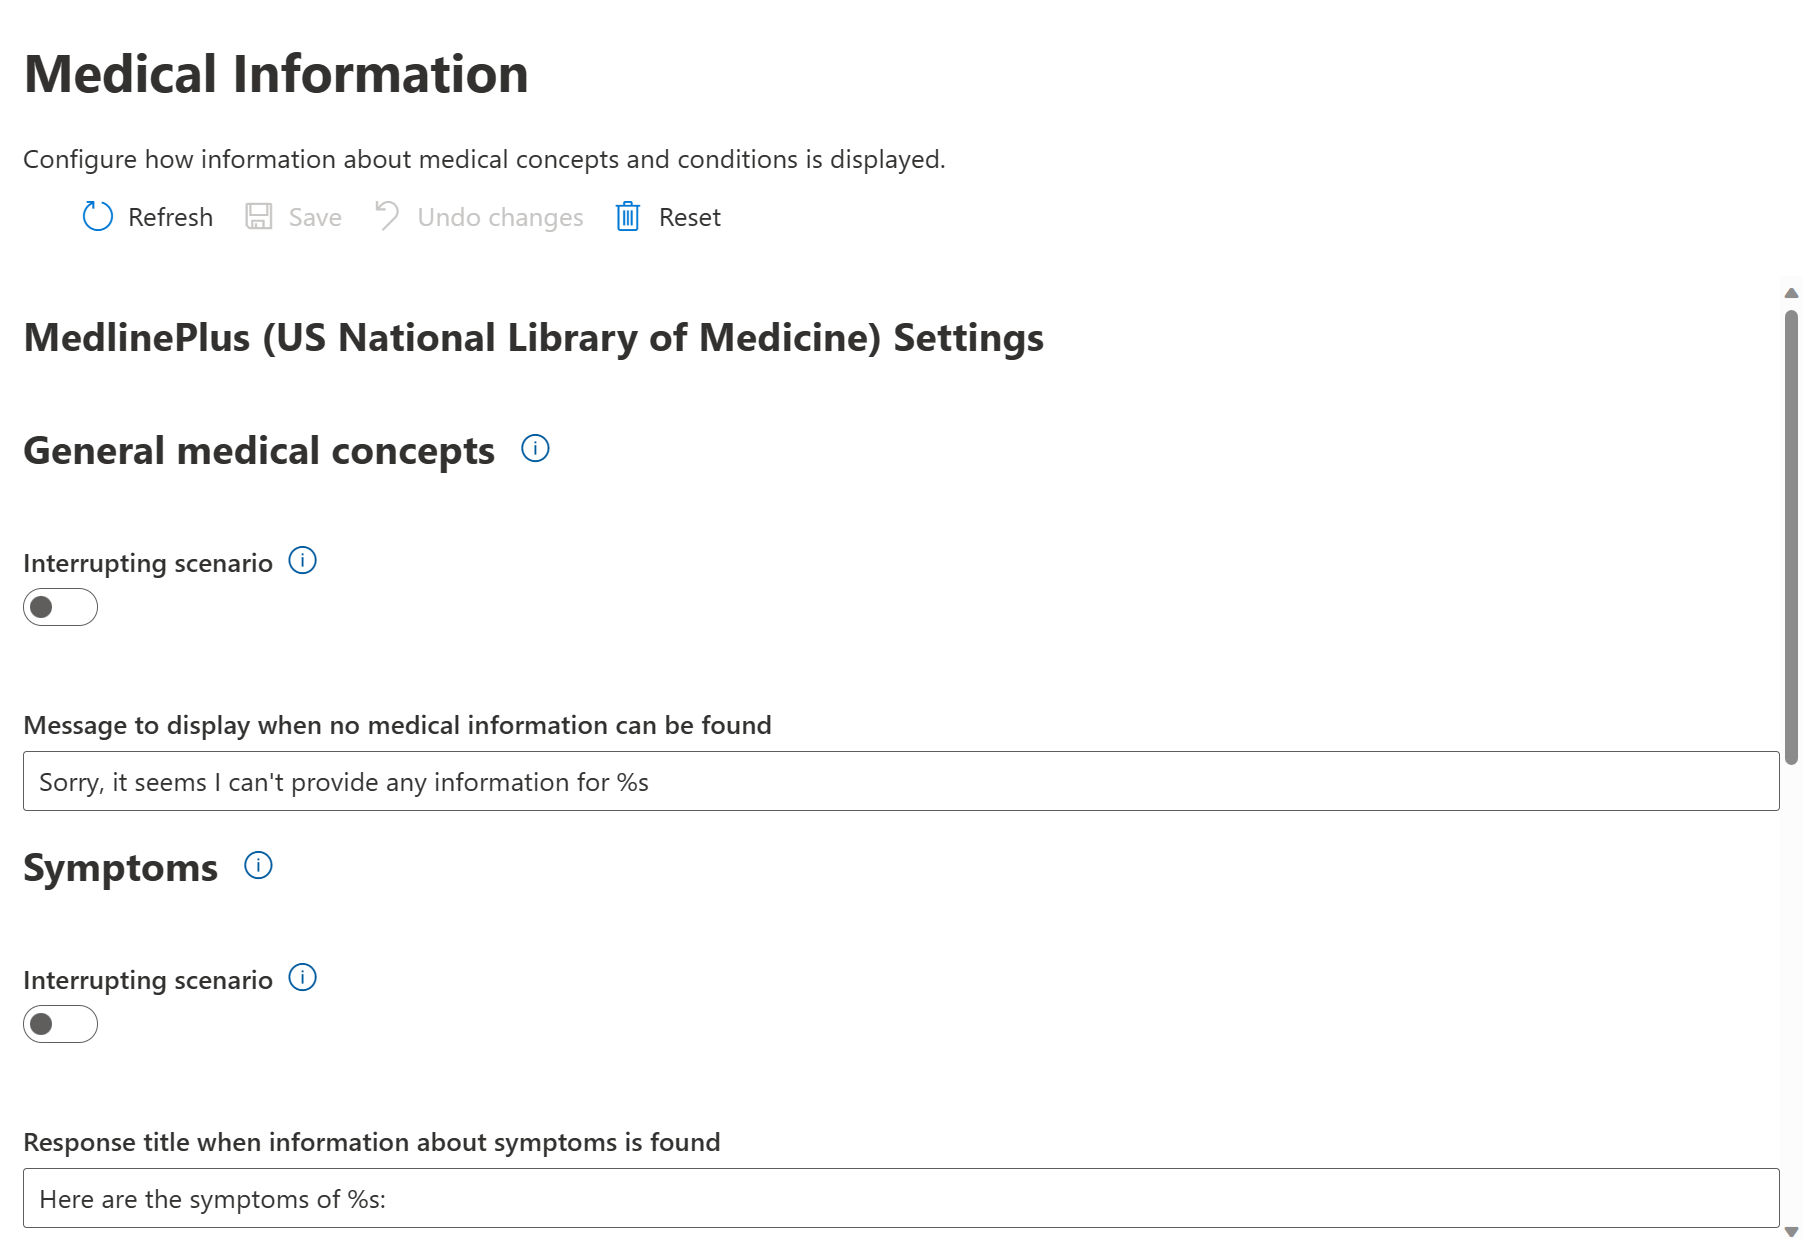 A screenshot of the medical configuration